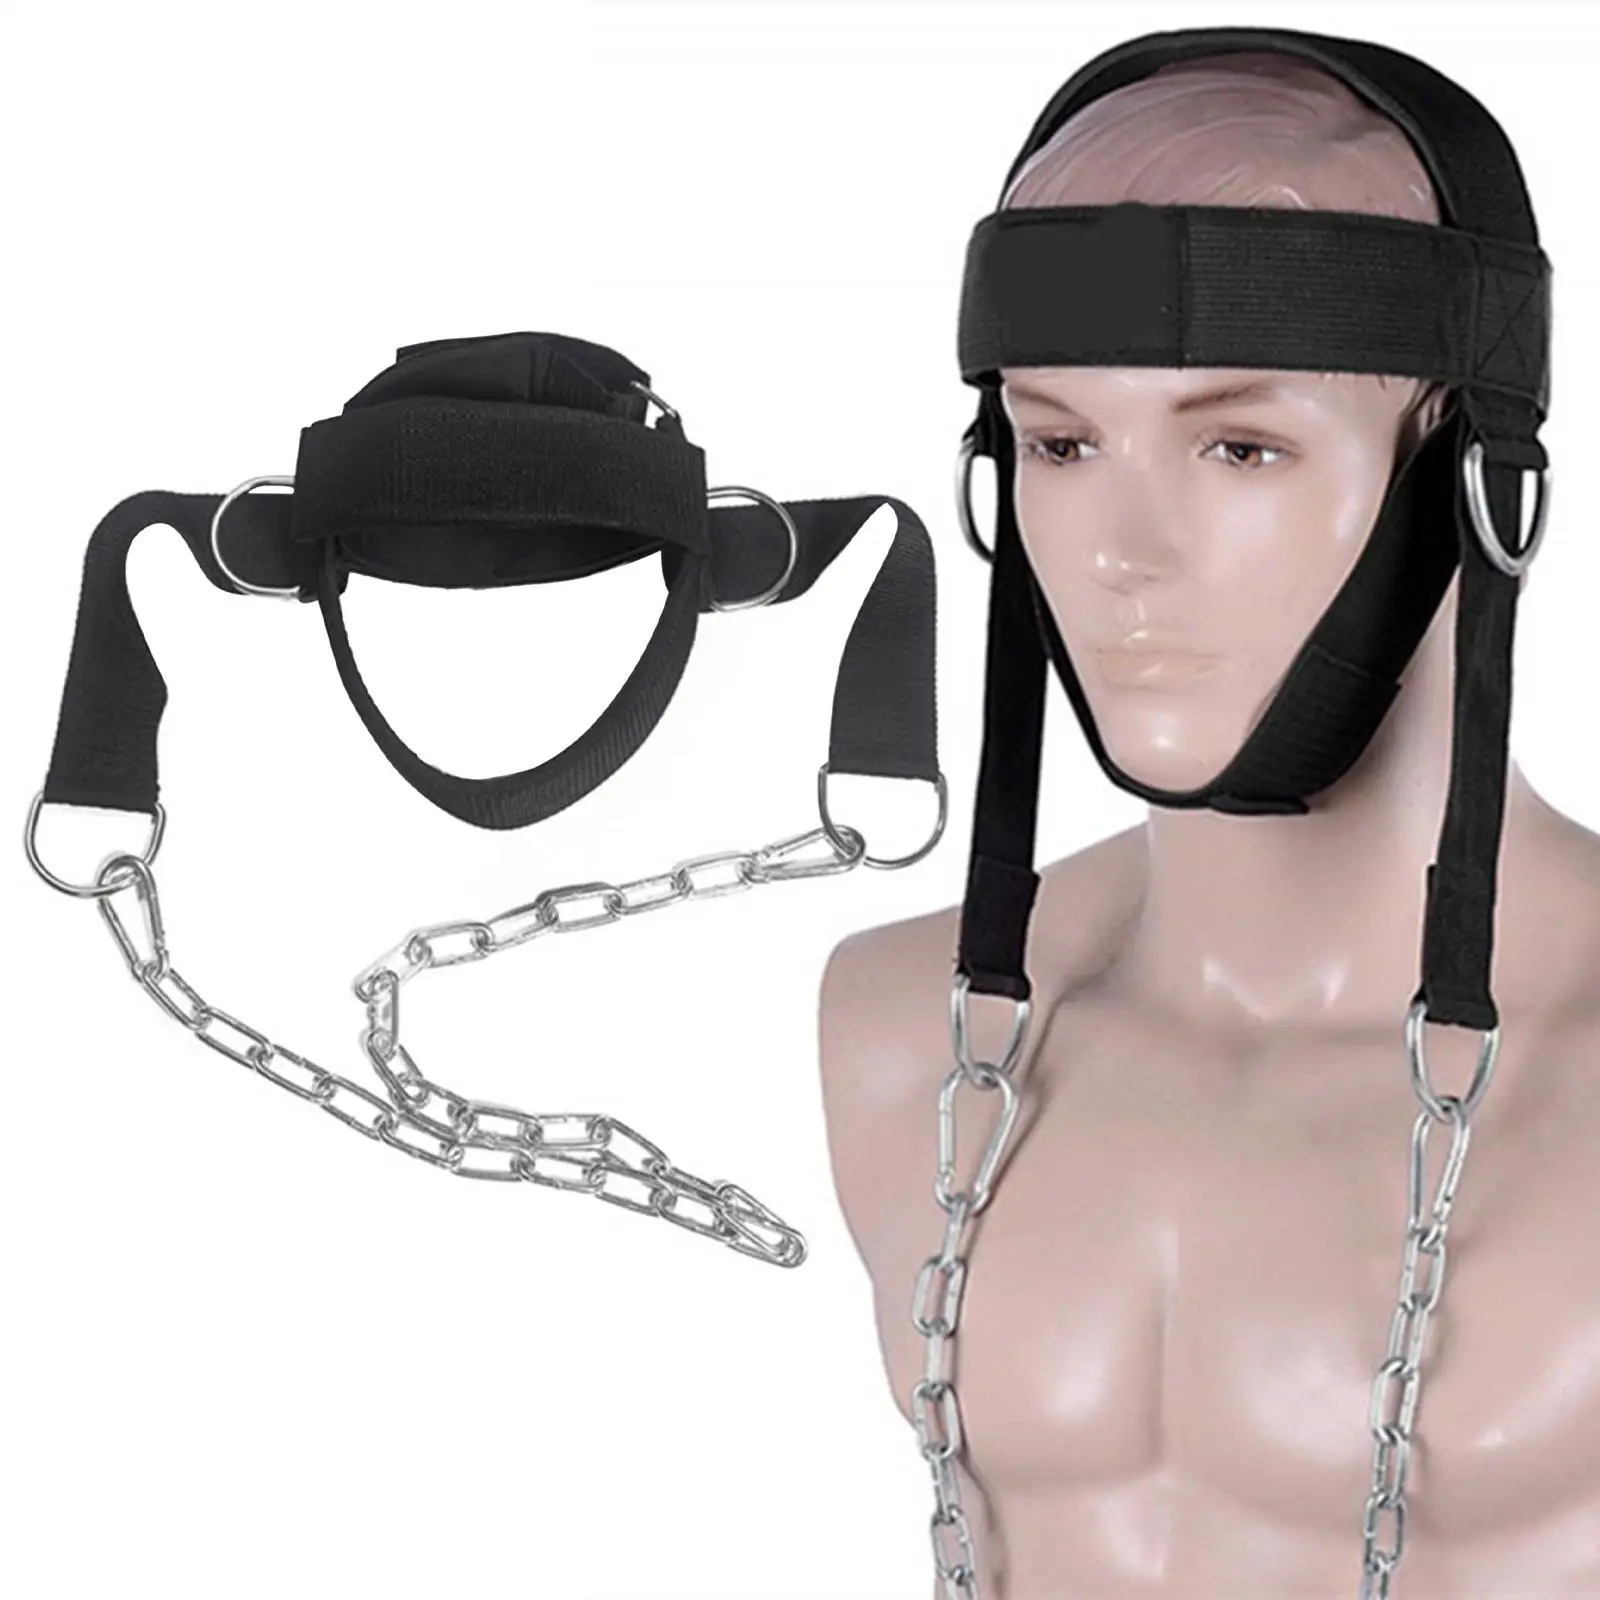 1x Head Neck Harness Stronger Oxford Cloth for Weight Lifting Workout Home